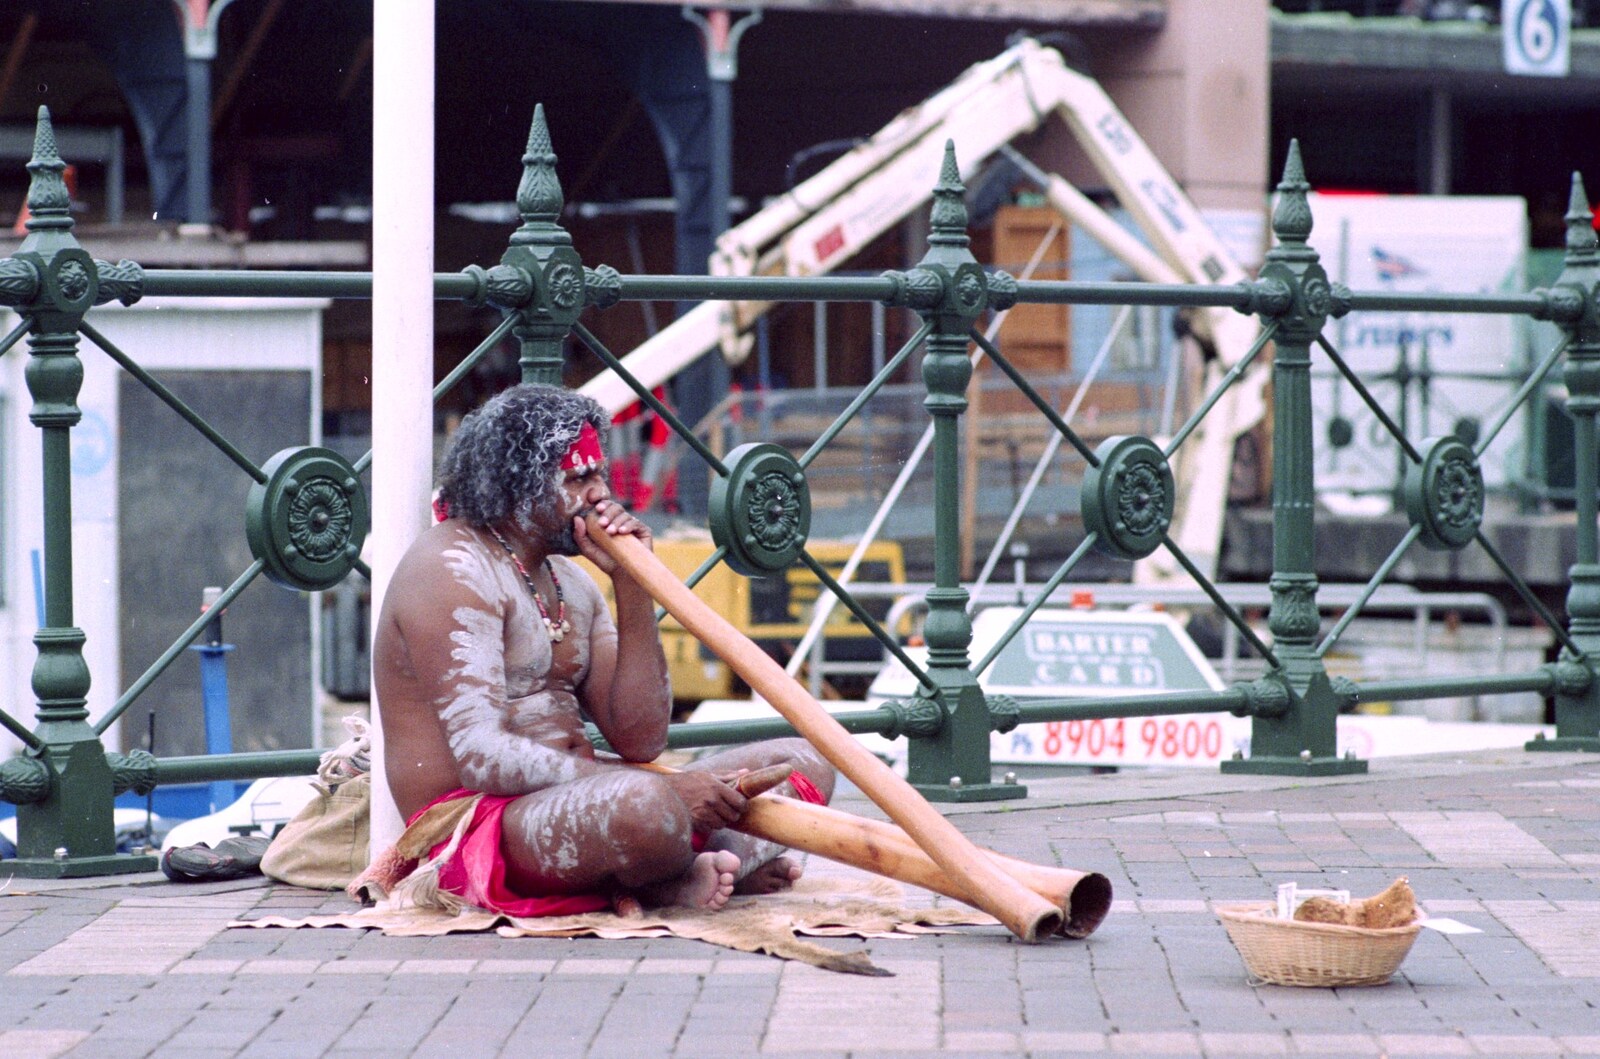 An Aboriginal didgeridoo player from A Trip to the Blue Mountains, New South Wales, Australia - 12th April 2000